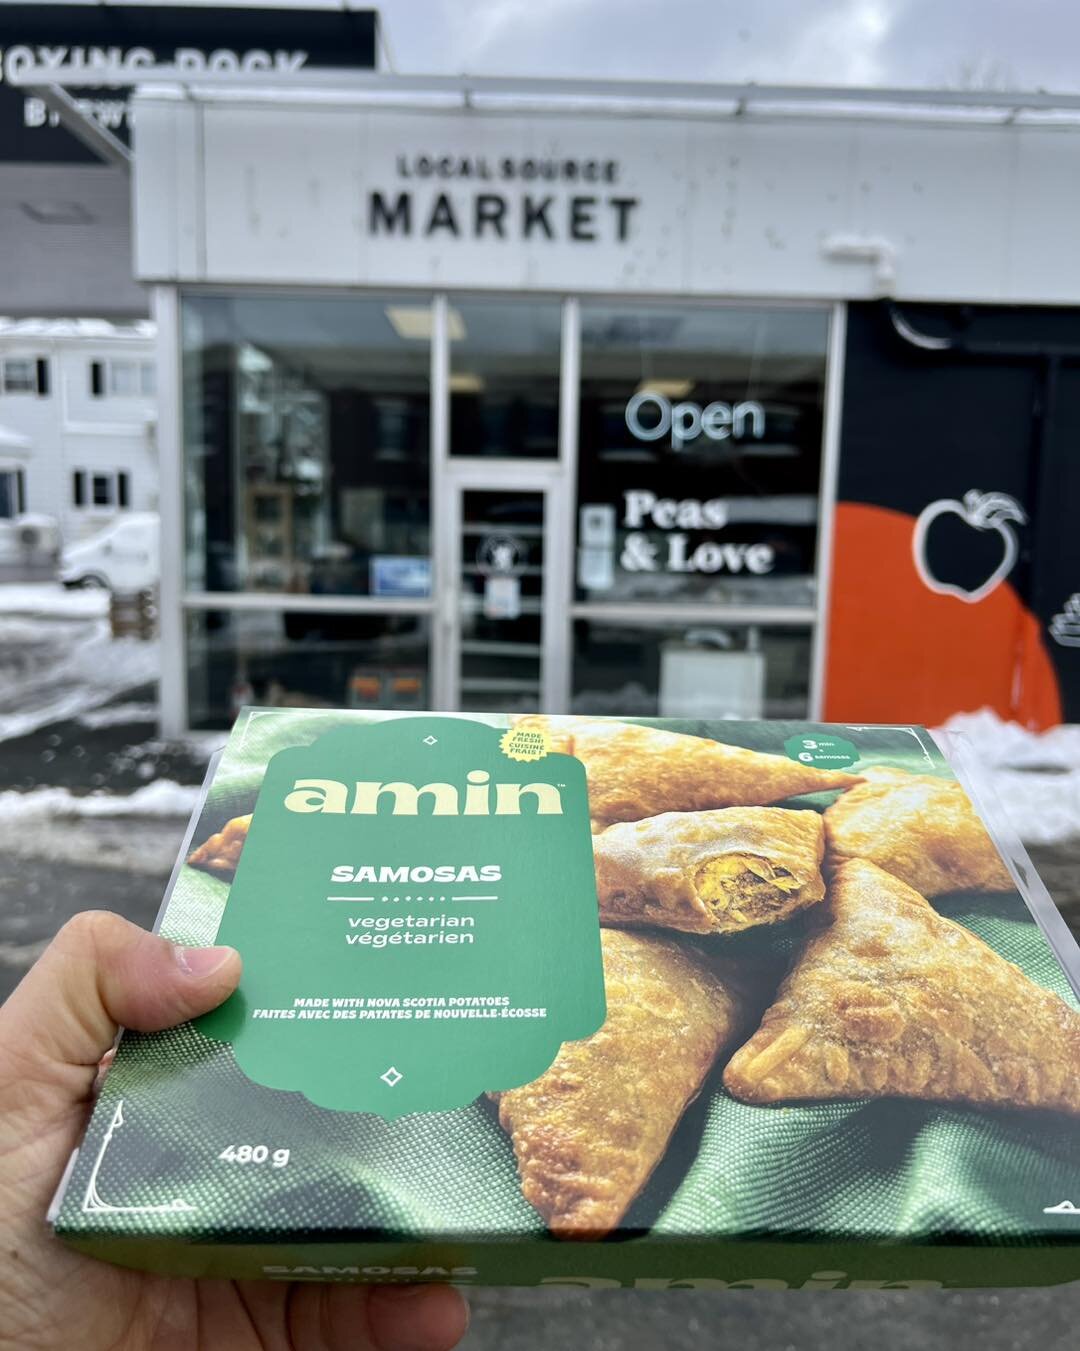 You can now find our Frozen Samosa packs at the vibrant Local Source Market situated on both Agricola Street and Windsor Street locations! 
@localsource 
Truly Peas &amp; Love ❤️